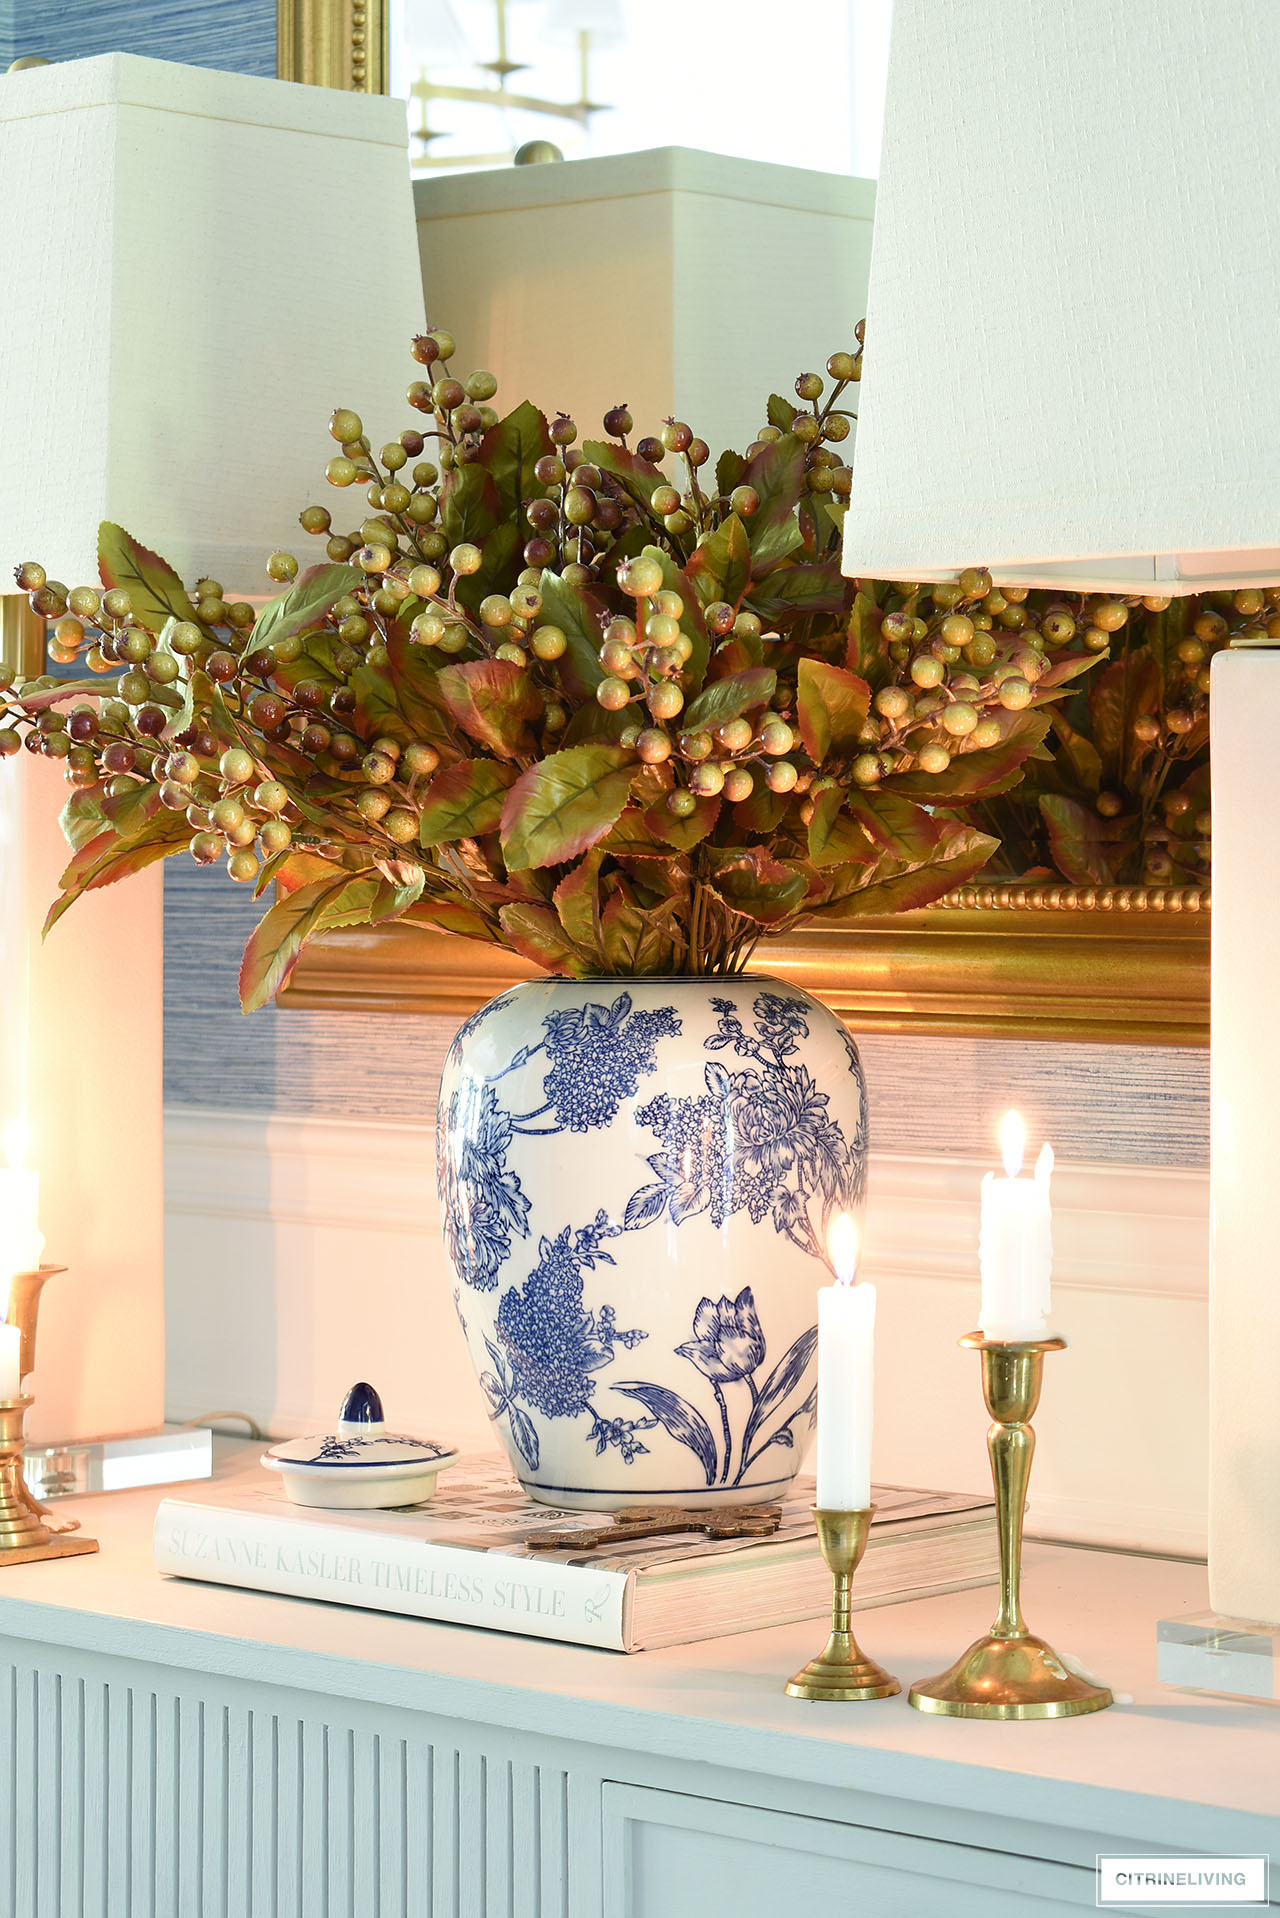 A blue and white jar with berries and leaves is a chic fall centerpiece.